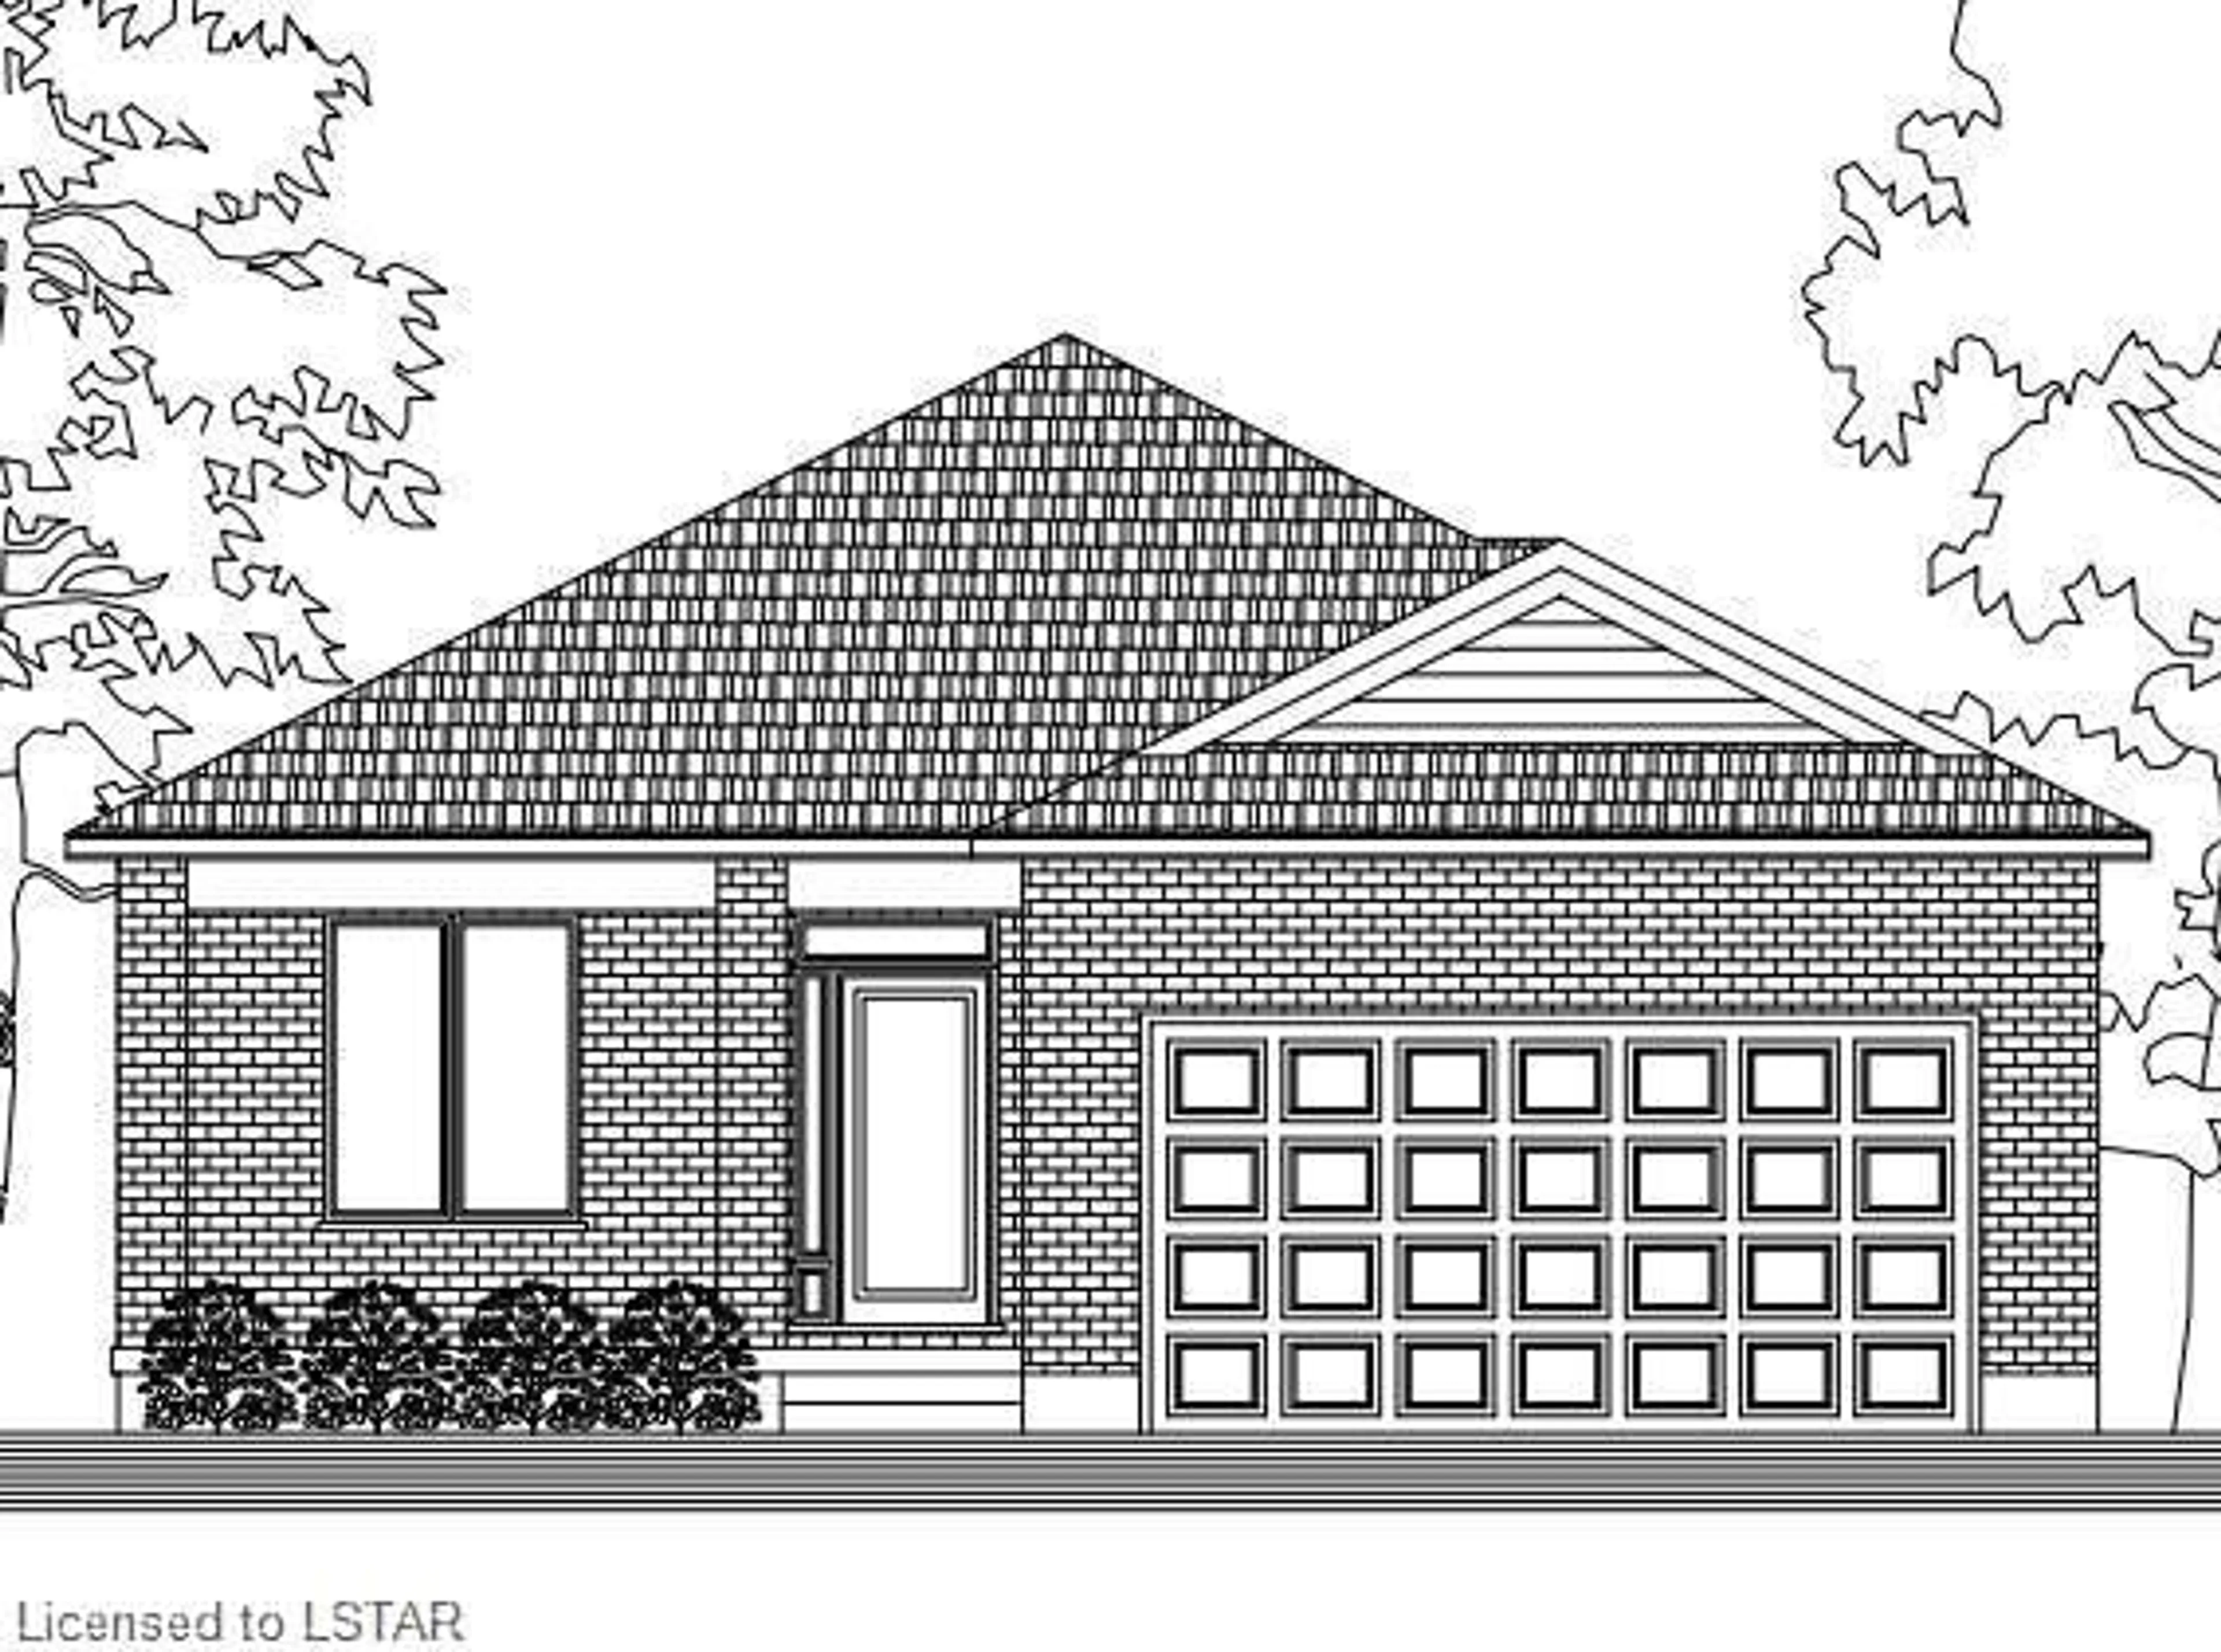 Home with brick exterior material for 158 Watts Dr, Lucan Ontario N0M 2J0